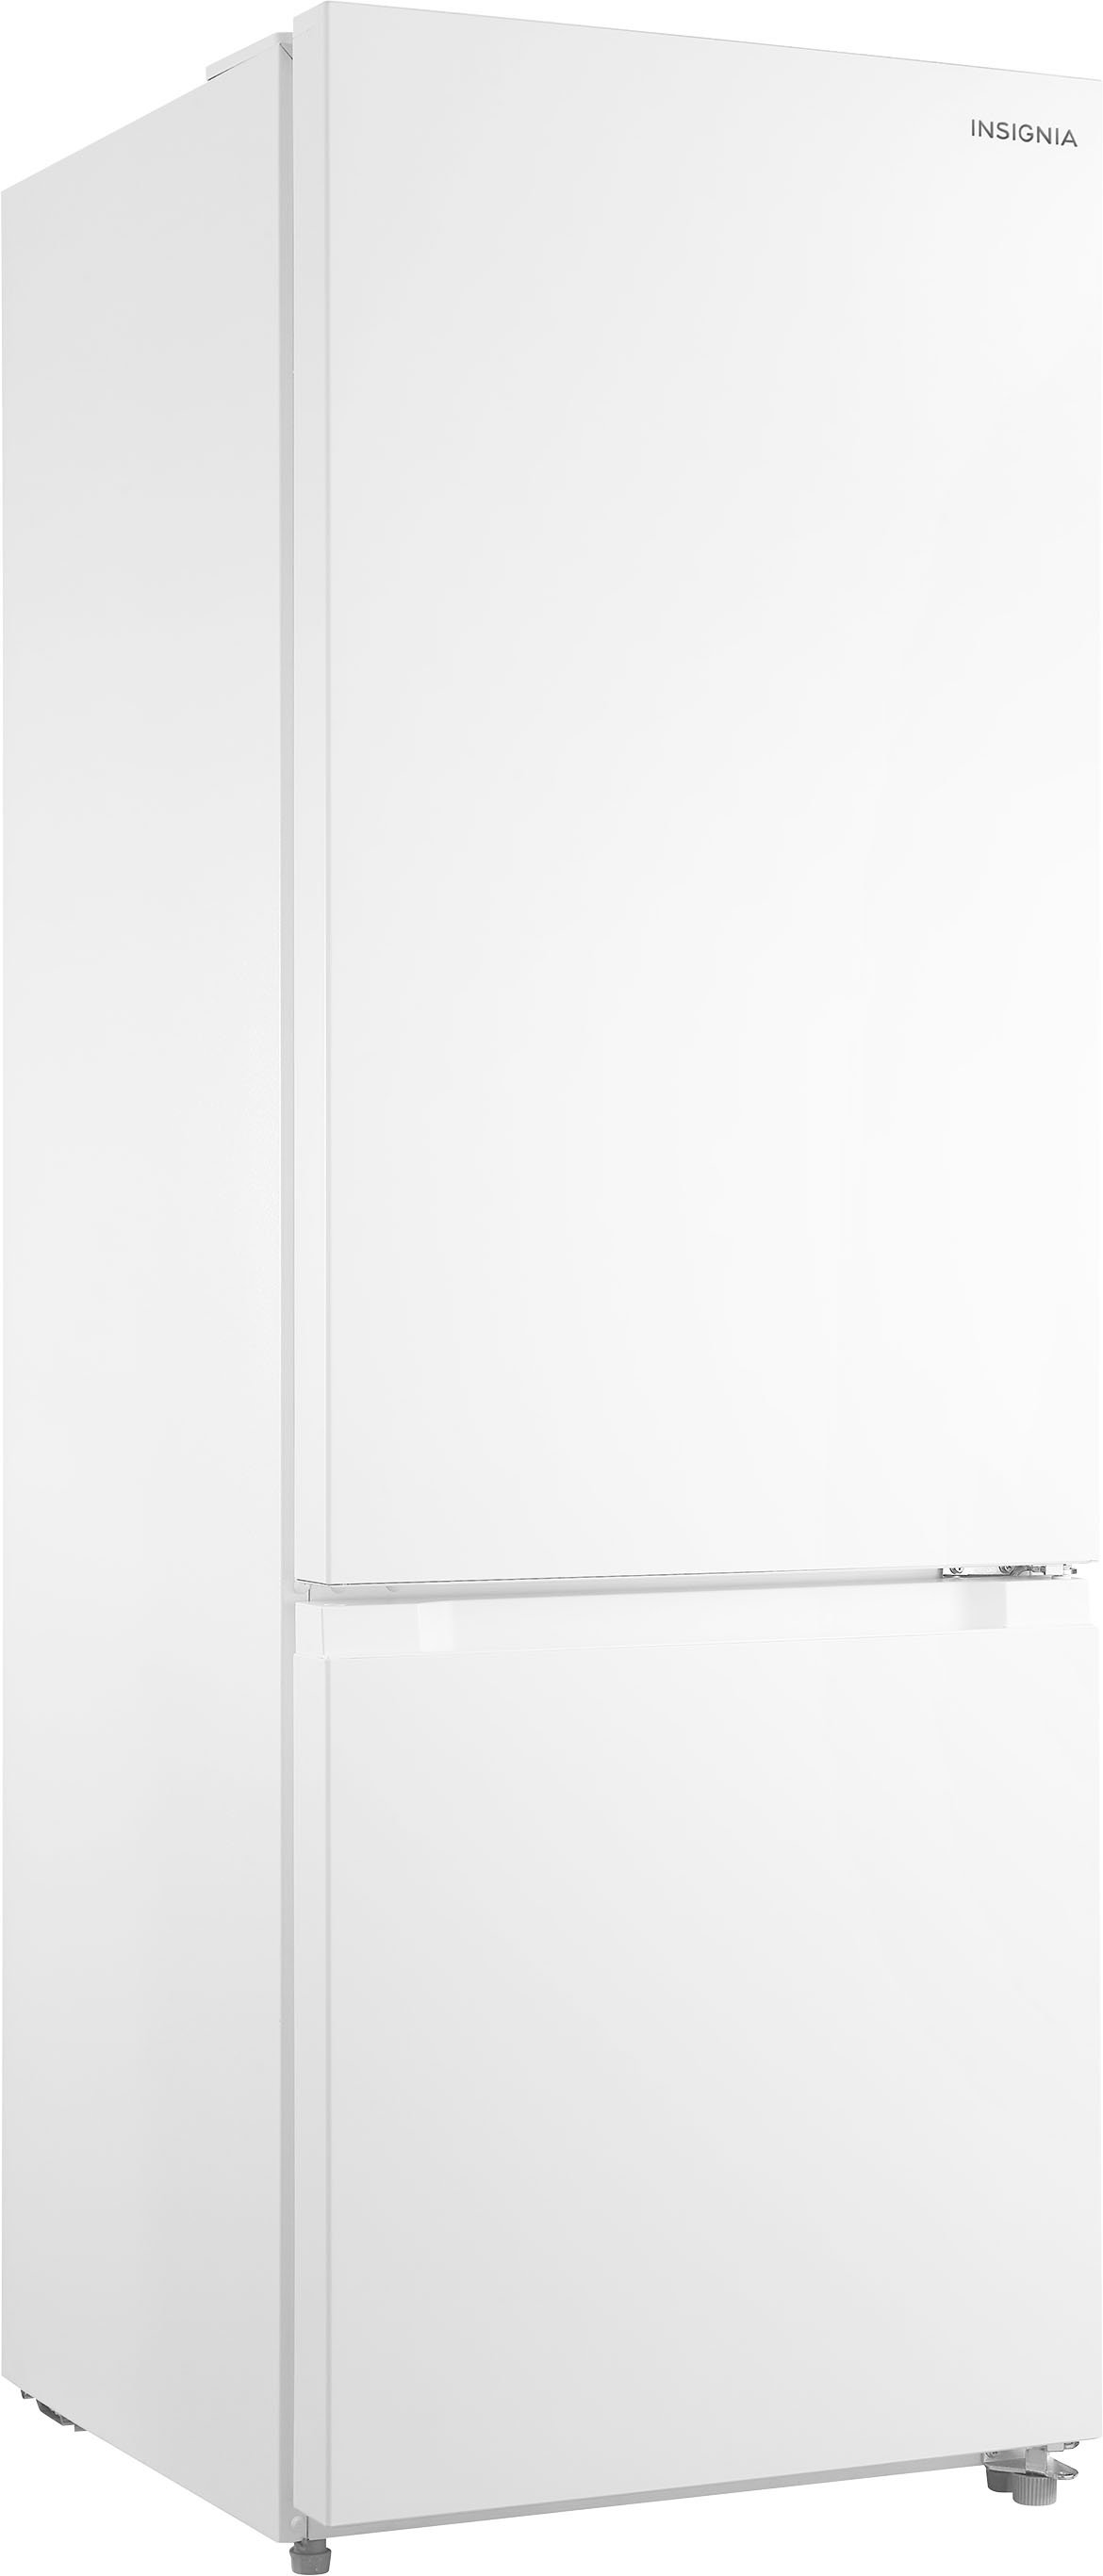 Angle View: Insignia™ - 11.5 Cu. Ft. Bottom Mount Refrigerator with ENERGY STAR Certification - White